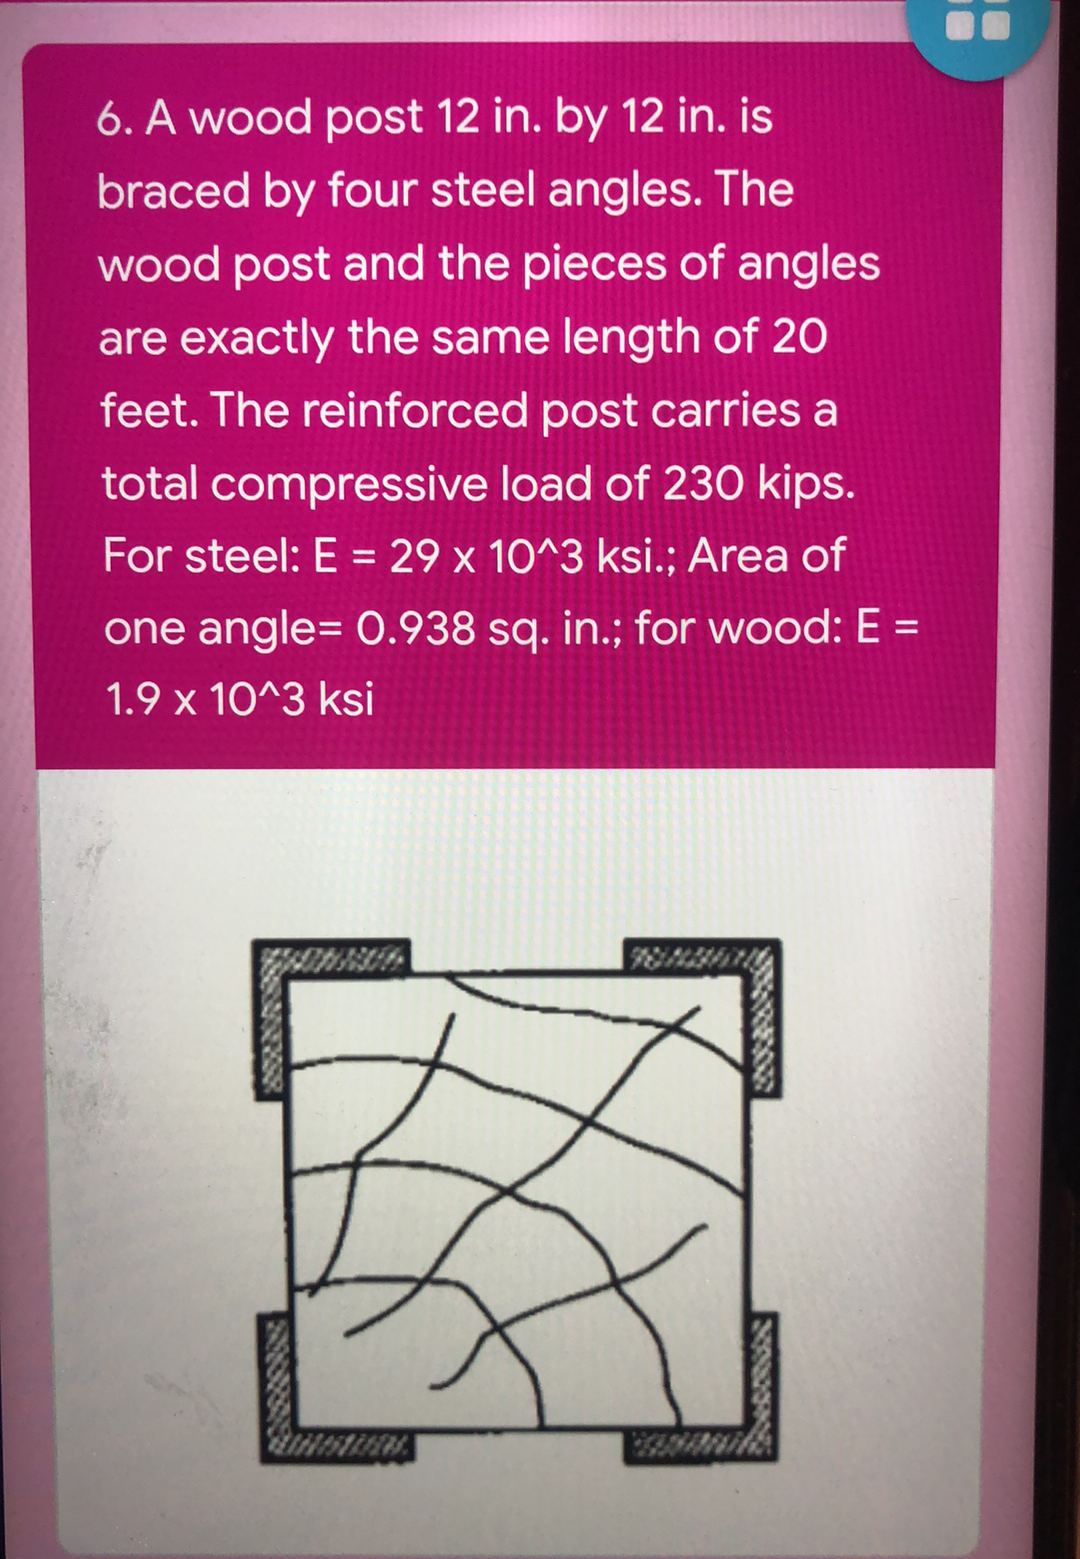 6. A wood post 12 in. by 12 in. is
braced by four steel angles. The
wood post and the pieces of angles
are exactly the same length of 20
feet. The reinforced post carries a
total compressive load of 230 kips.
For steel: E = 29 x 10^3 ksi.; Area of
%3D
one angle= O.938 sq. in.; for wood: E =
1.9 x 10^3 ksi
